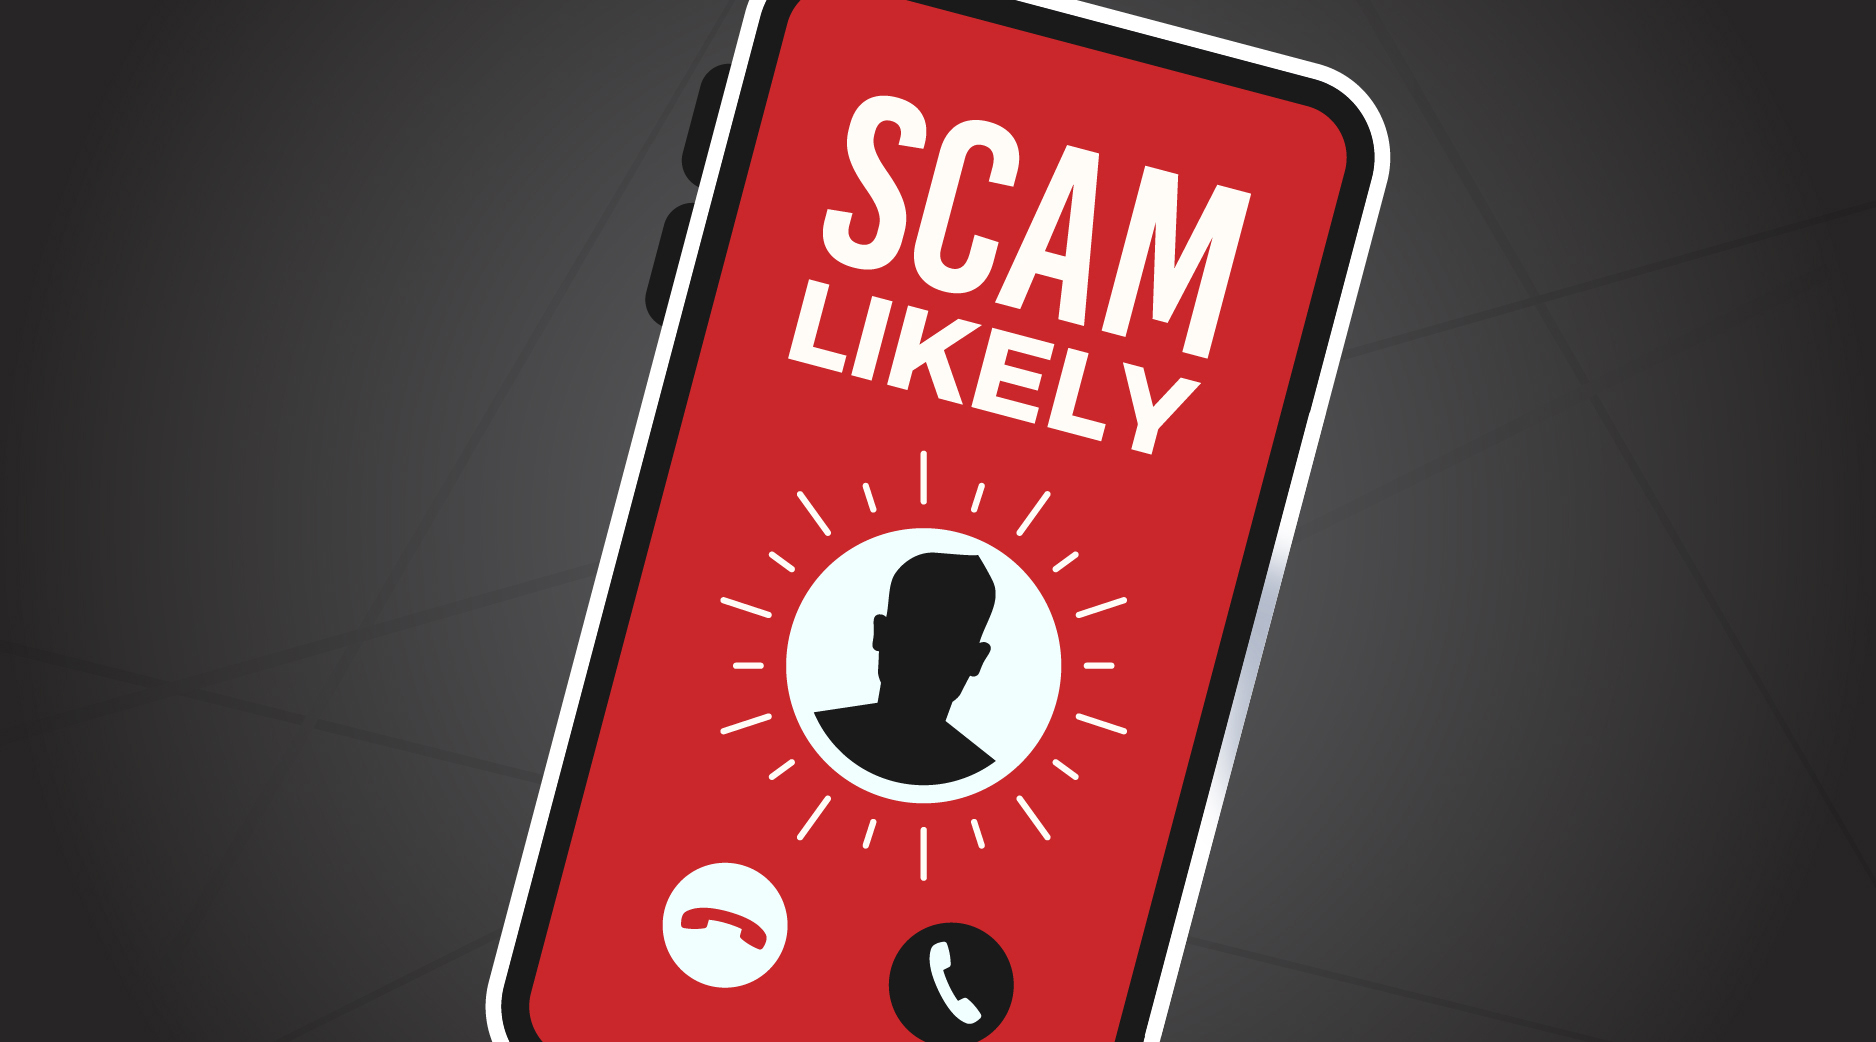 Scam tips offered by Mississippi Power.